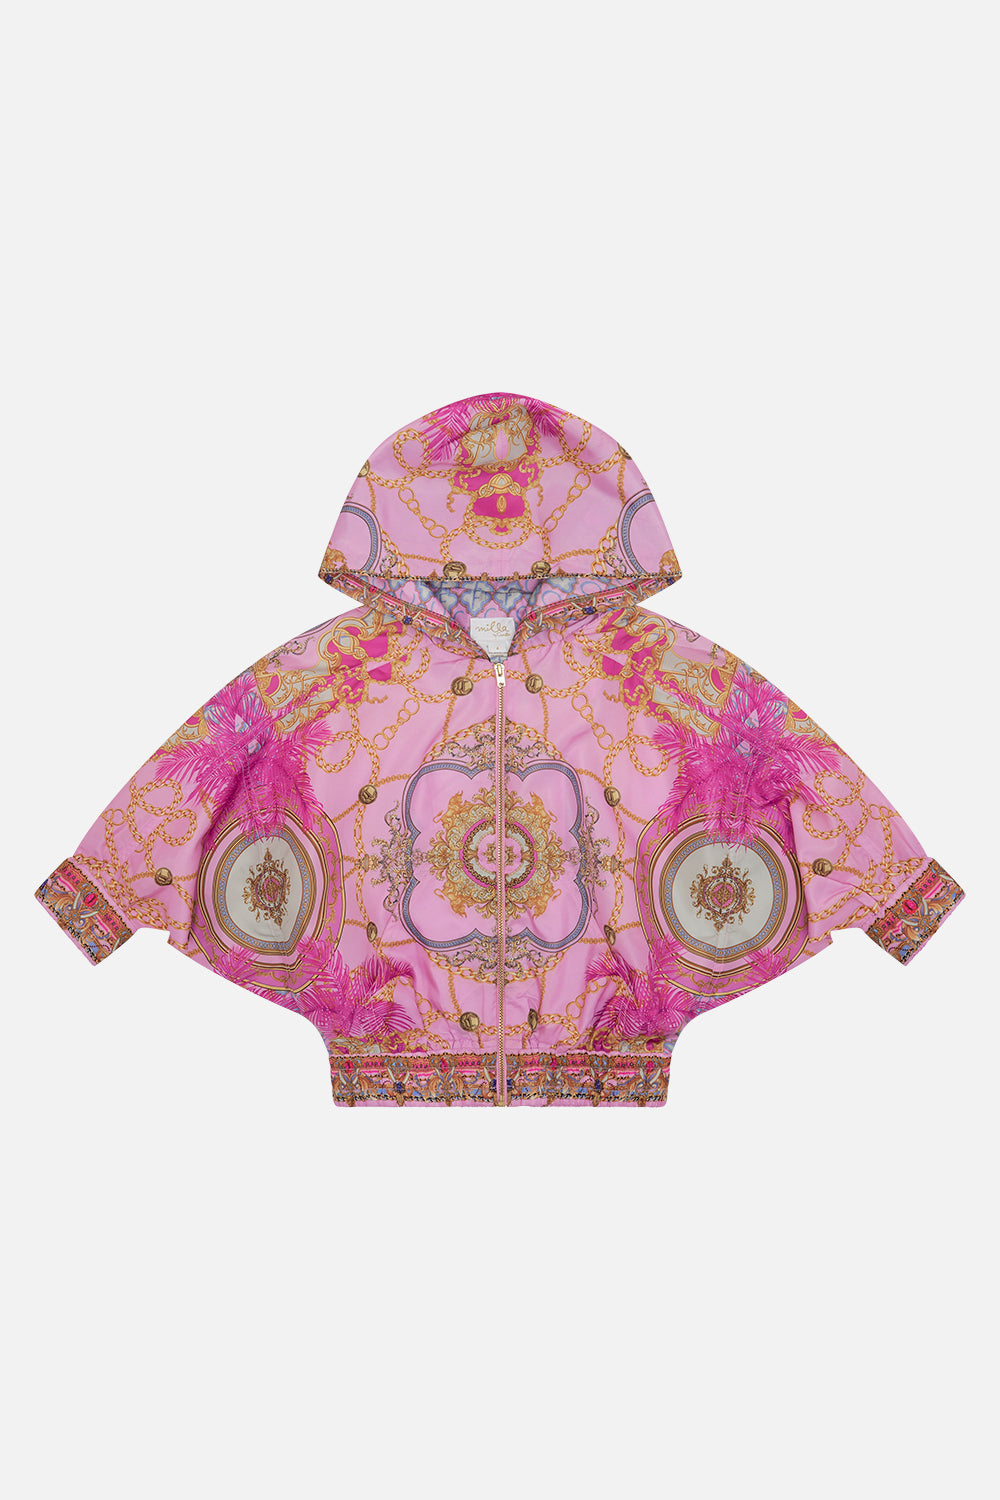 Product view of MILLA By CAMILLA kids printed jacket in Tiptoe The Tightrope print